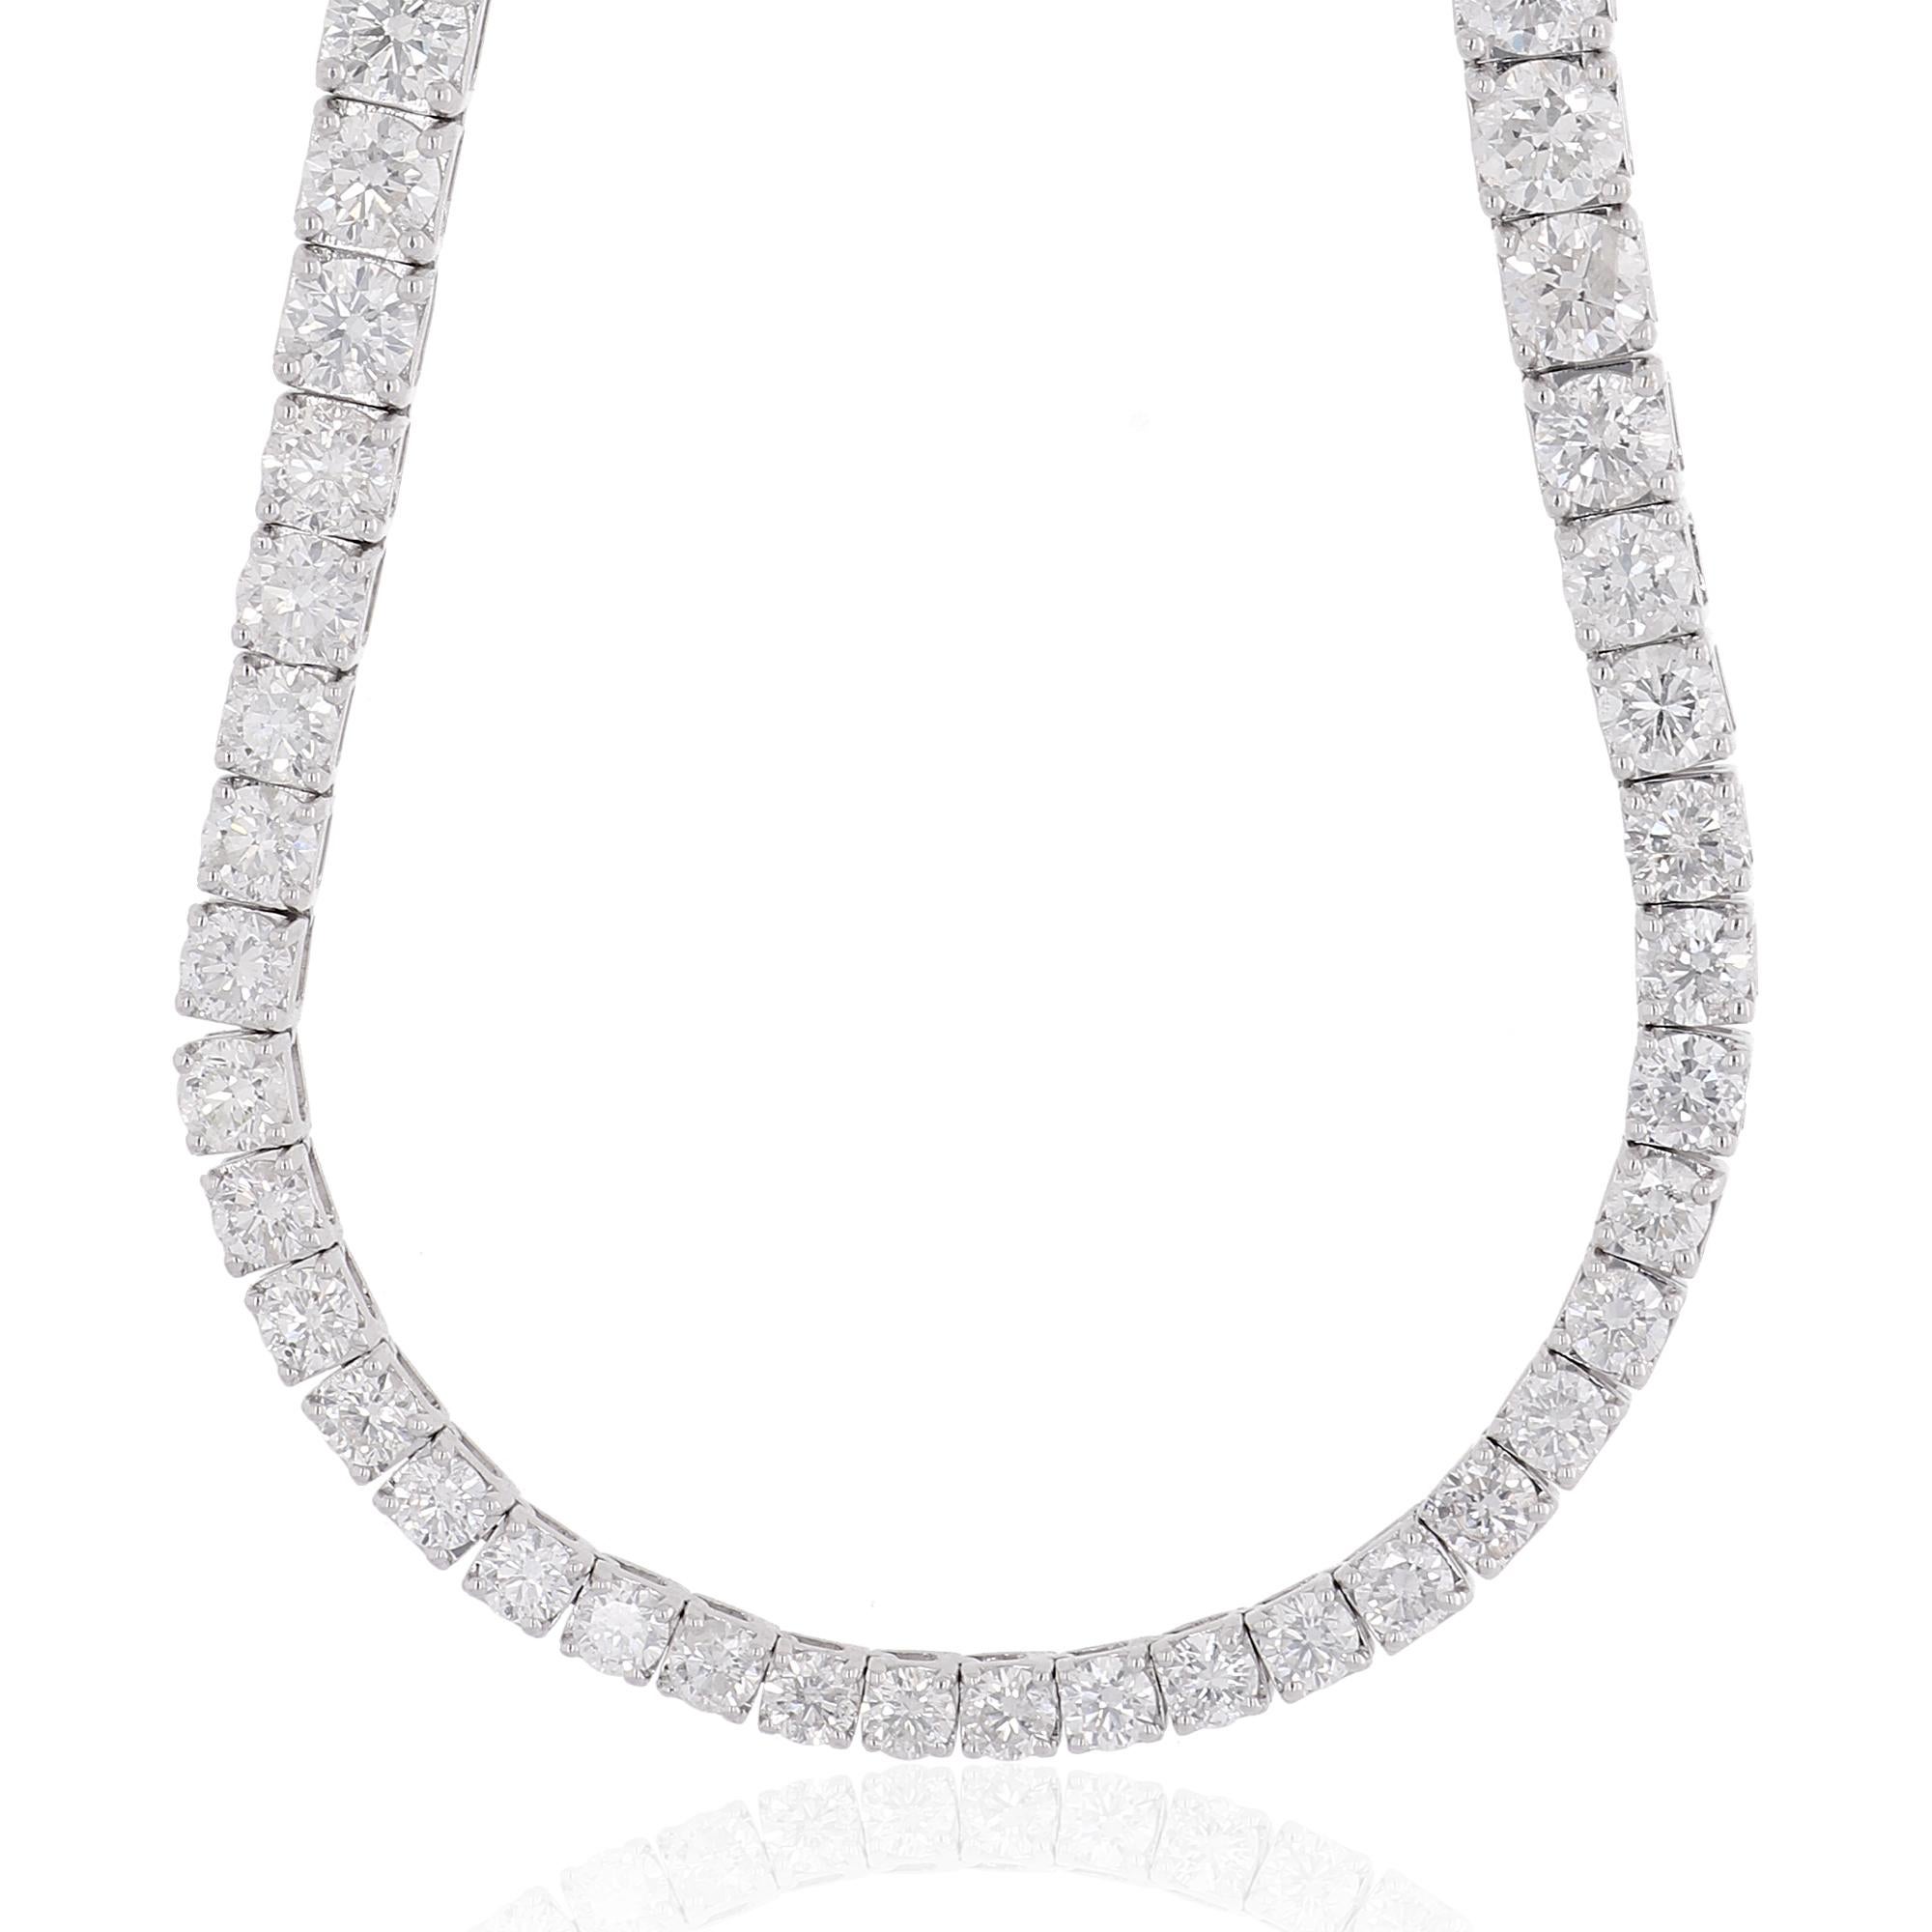 At the heart of this necklace lies a magnificent arrangement of round diamonds, totaling an impressive 15.6 carats. Each diamond is hand-selected for its exceptional clarity, graded at SI, ensuring that they possess remarkable transparency and